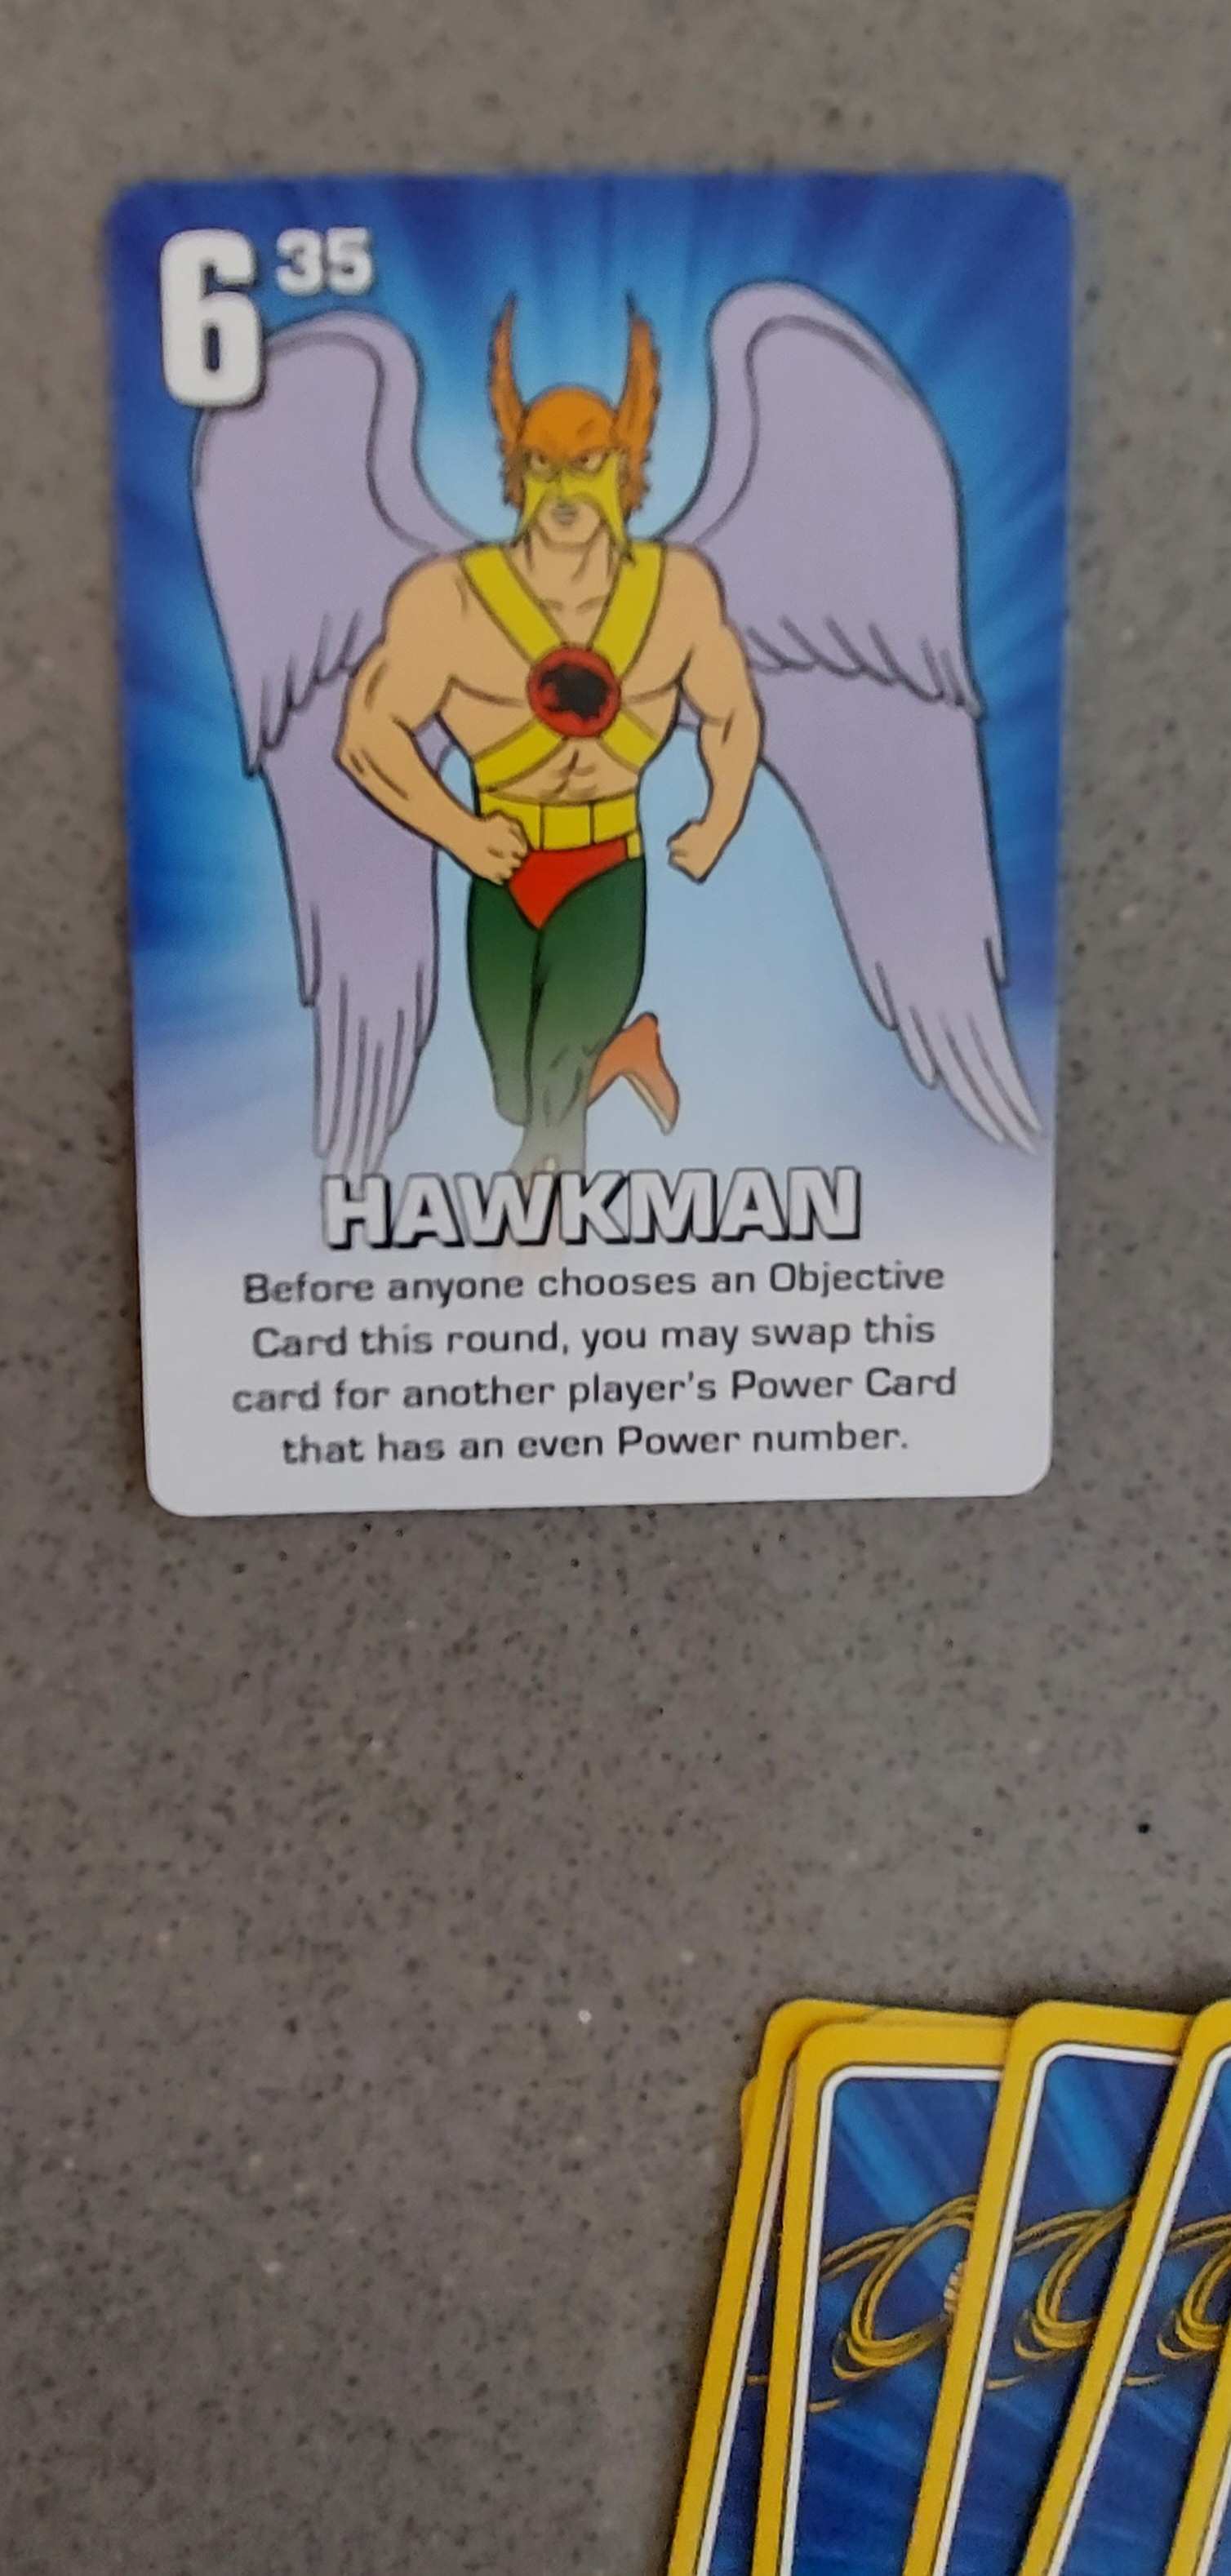 HIGH CARD】Collect the 52 cards that contain “superhuman powers